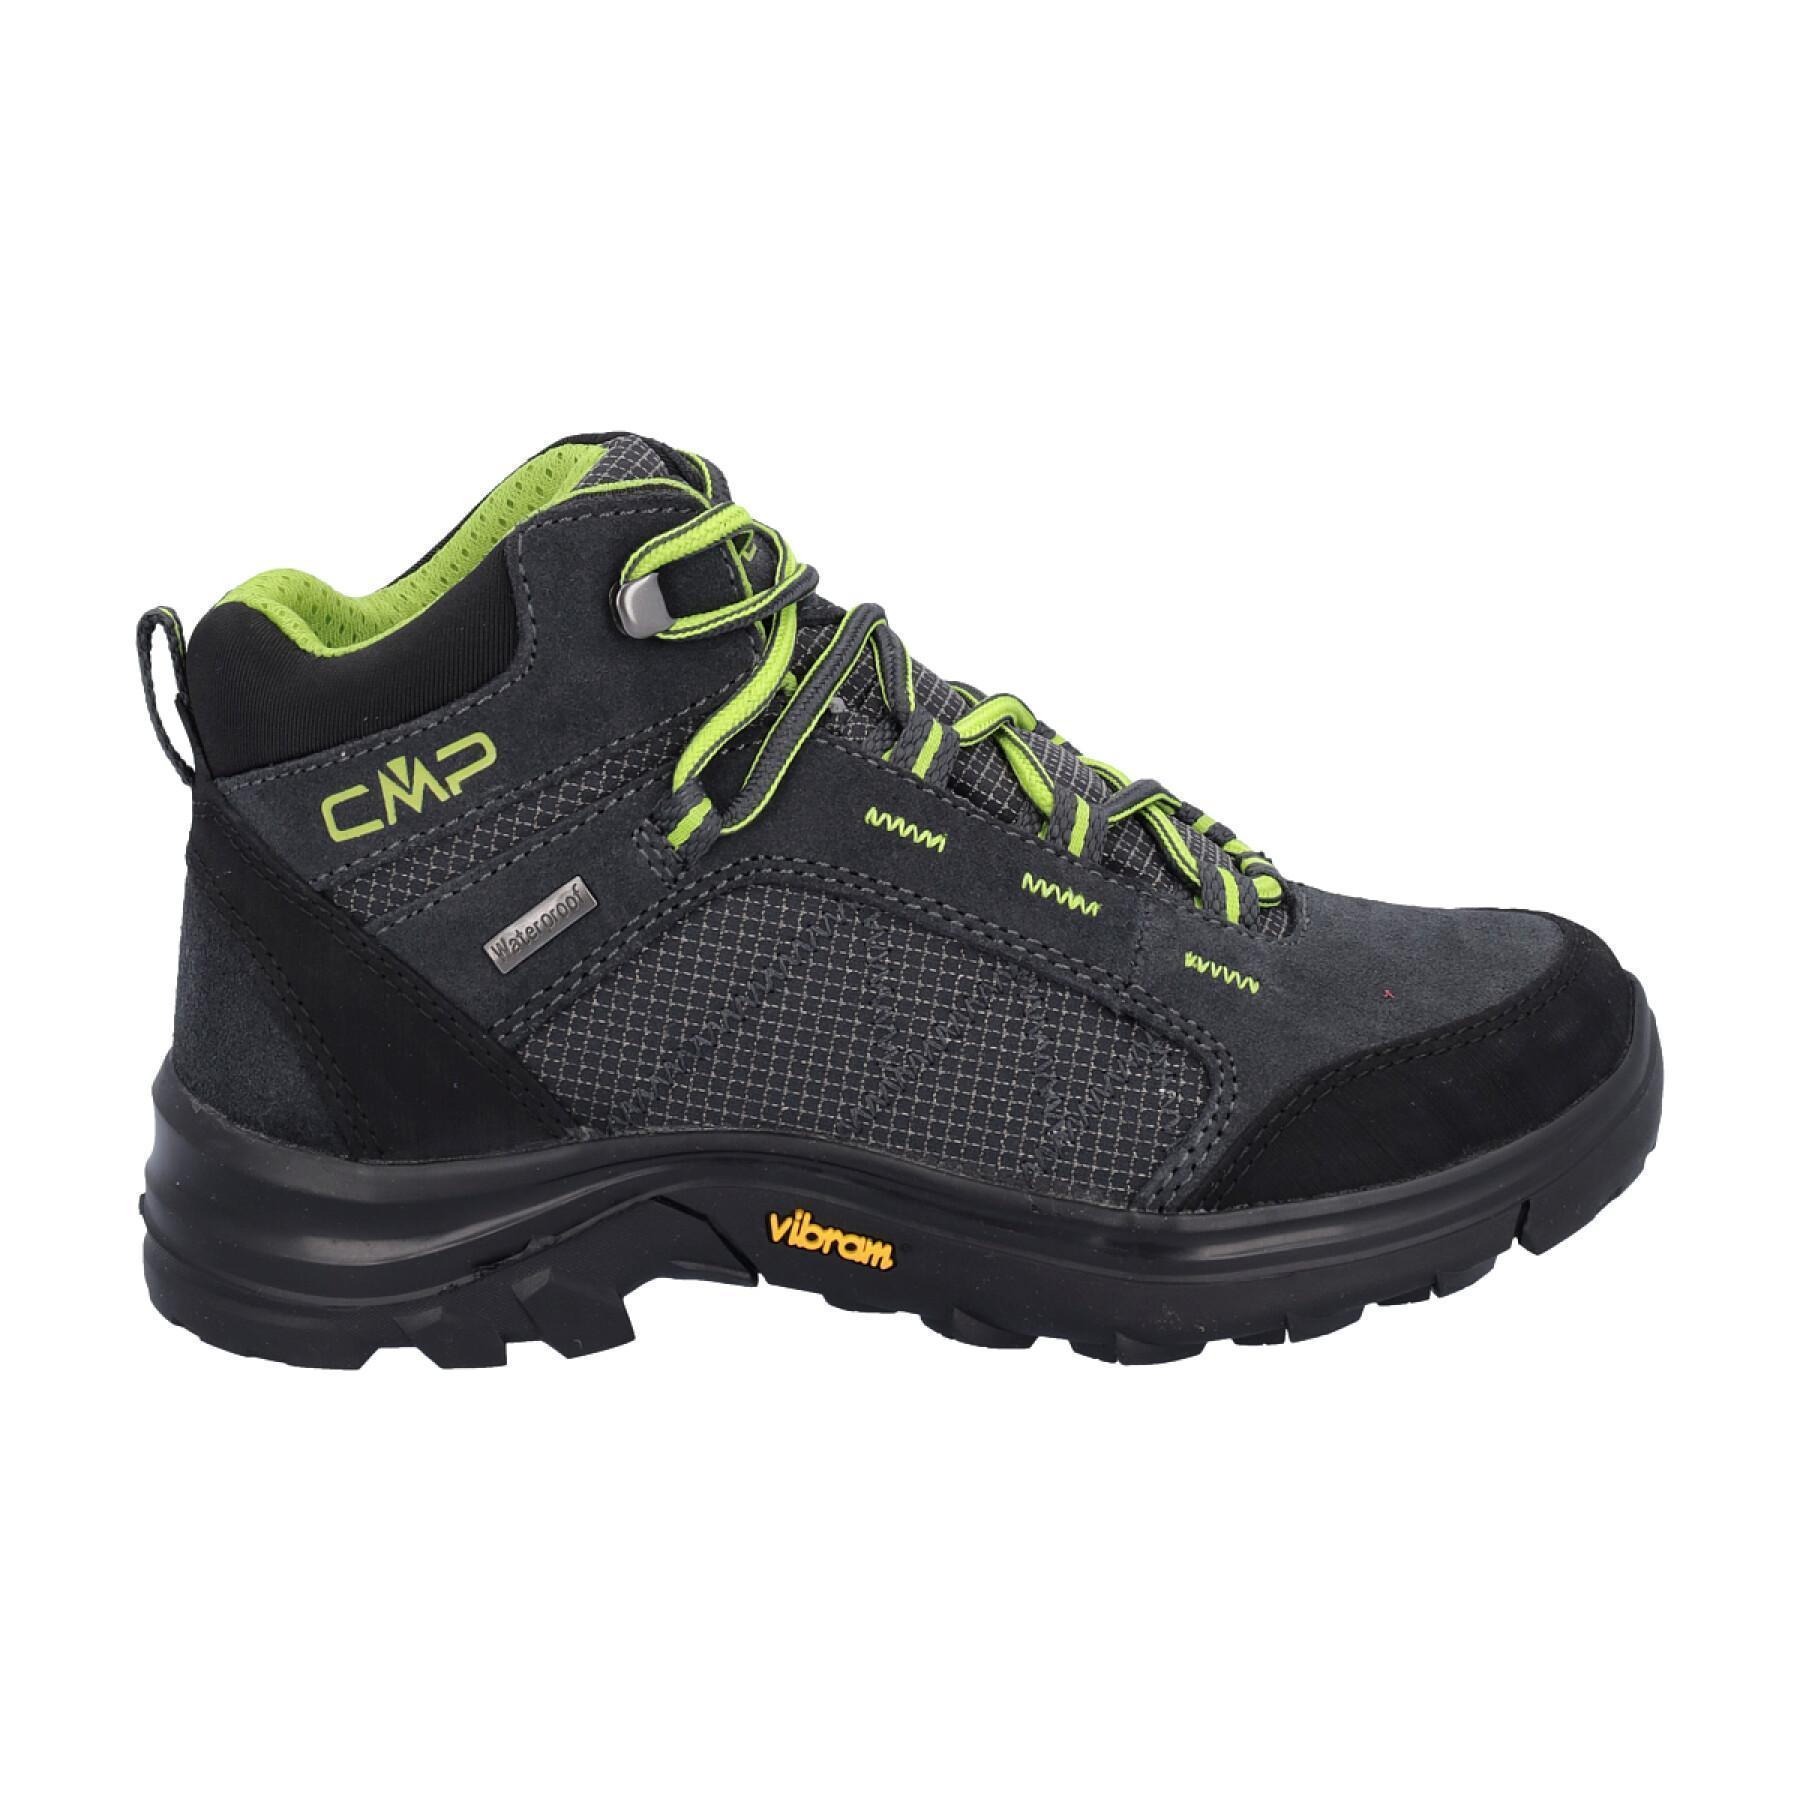 Mid hiking shoes for children CMP Thiamat 2.0 Waterproof